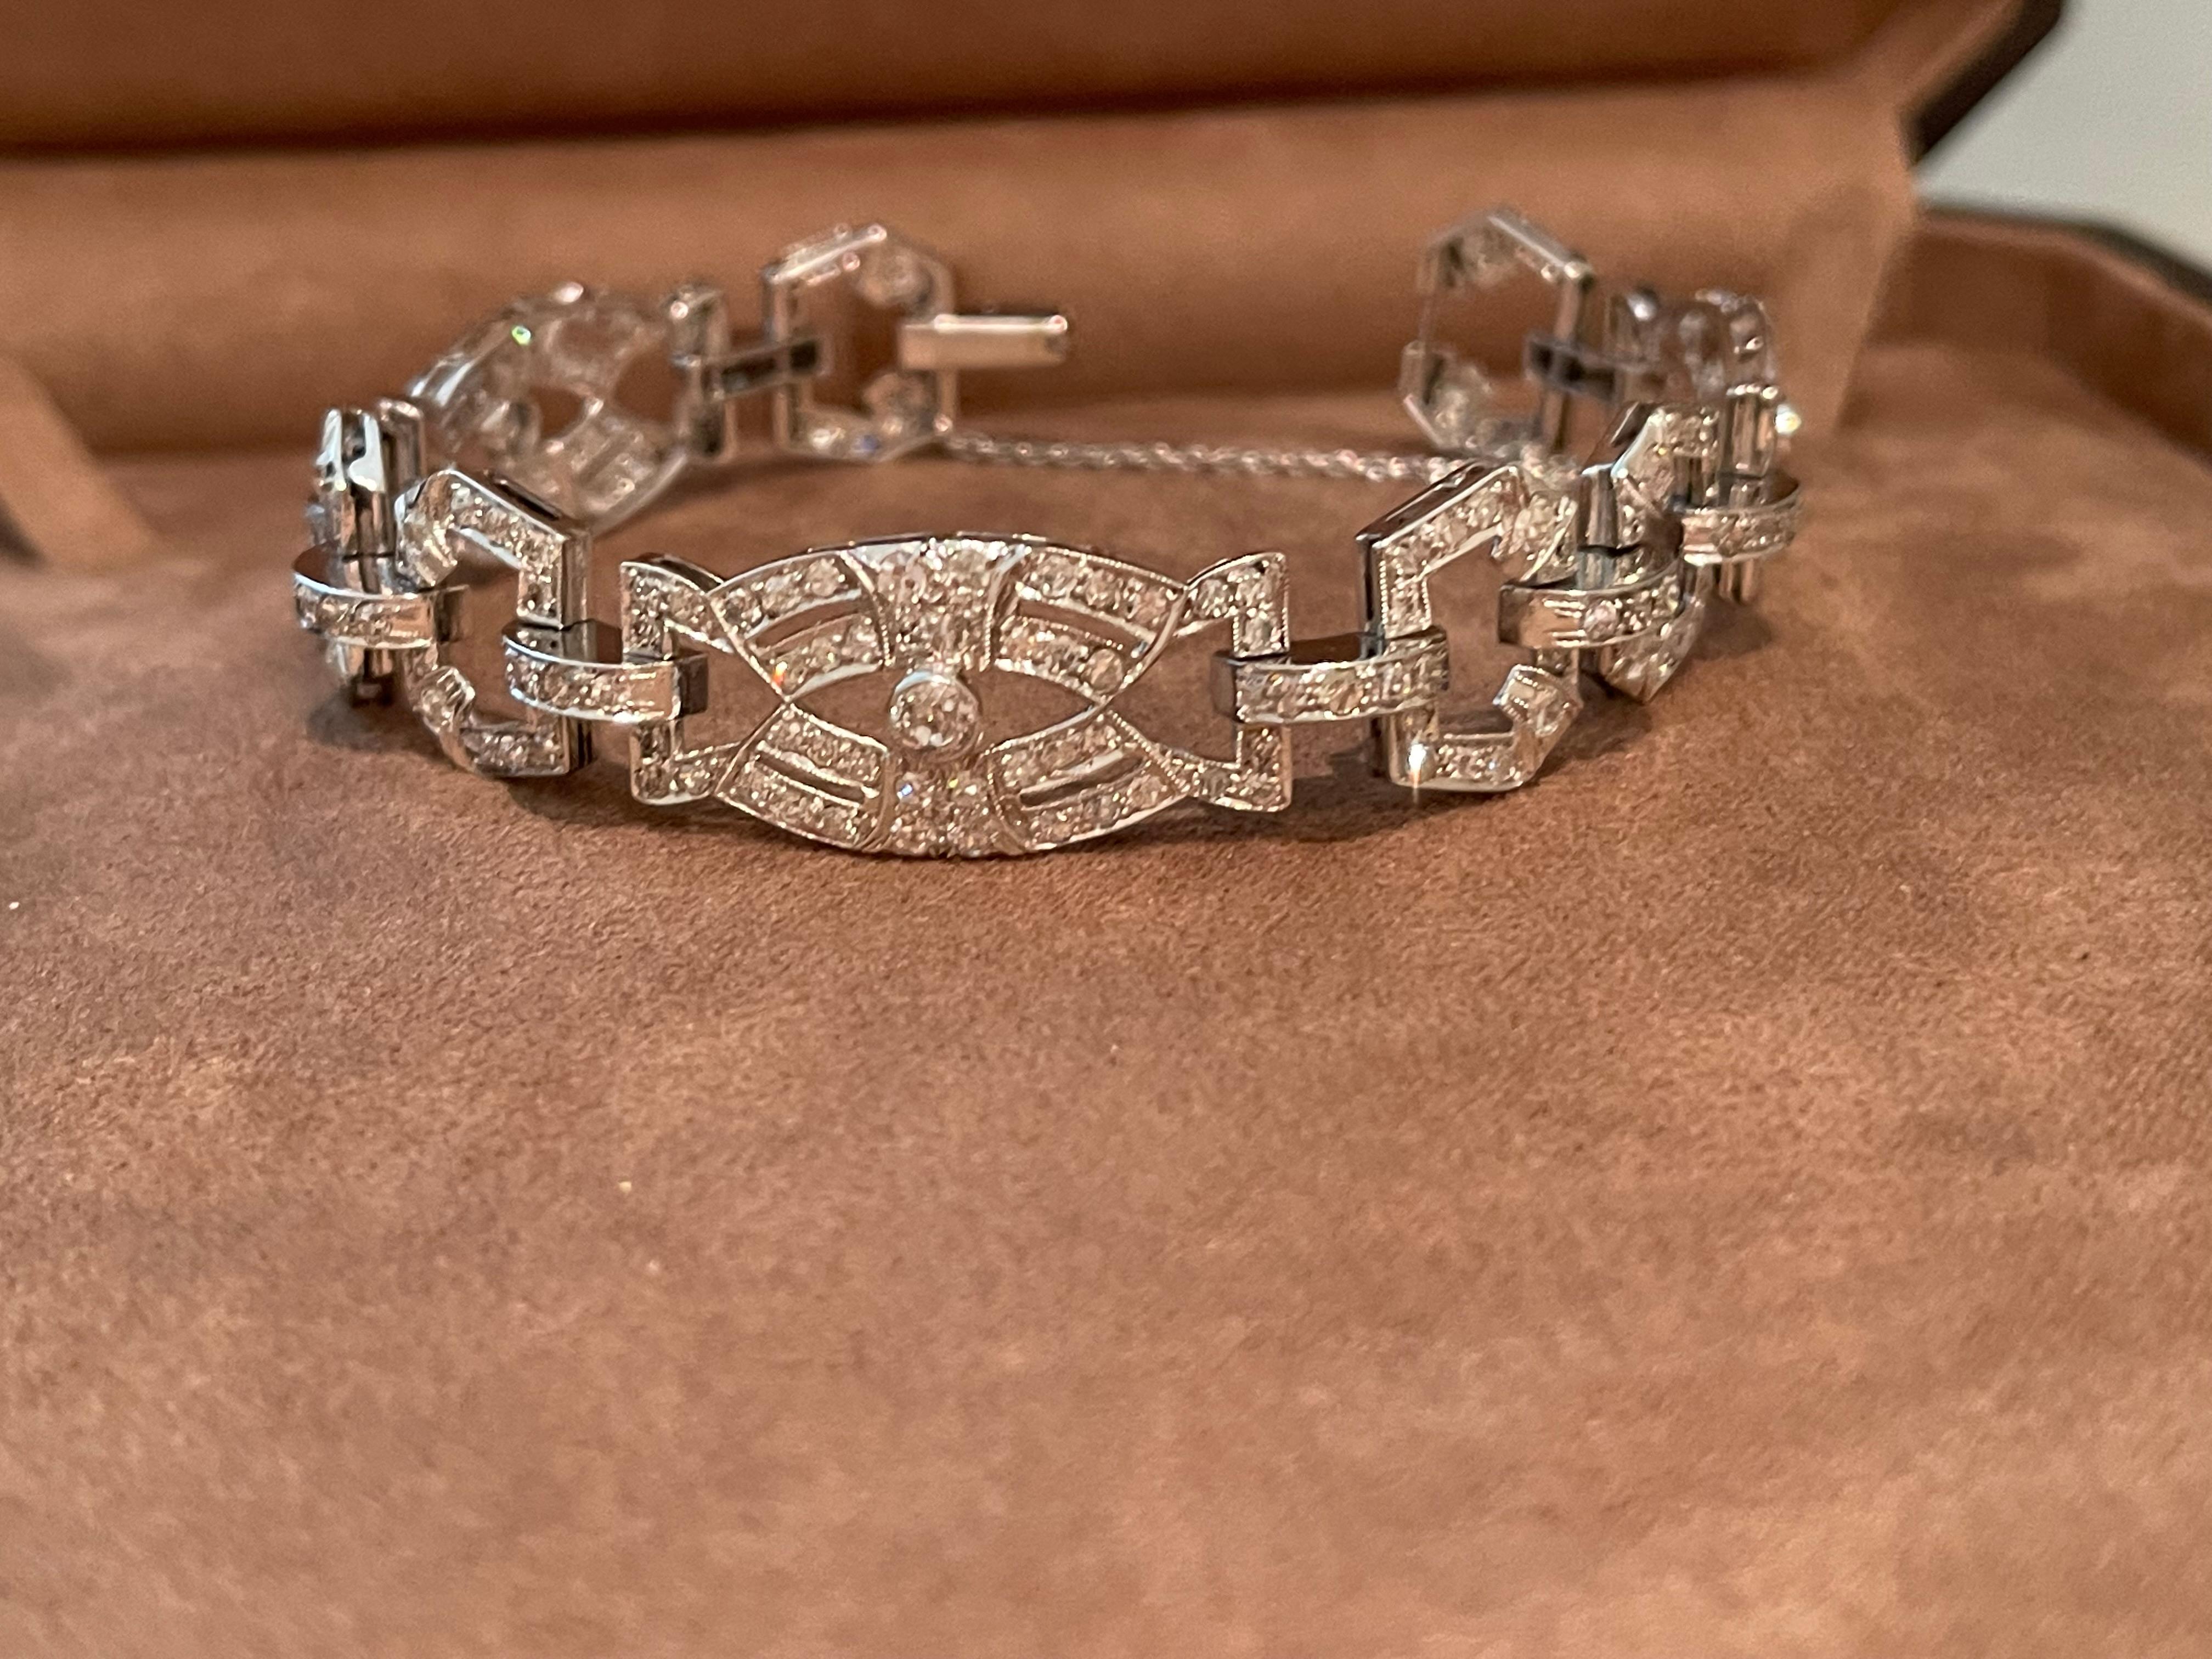 A gorgeous Art Deco diamond bracelet set in platinum. 
This particular piece is a perfect example of Art Deco craftsmanship and elegance! The bracelet is designed as an openwork panel featuring diamond set plaque links. The plaque links are  fully